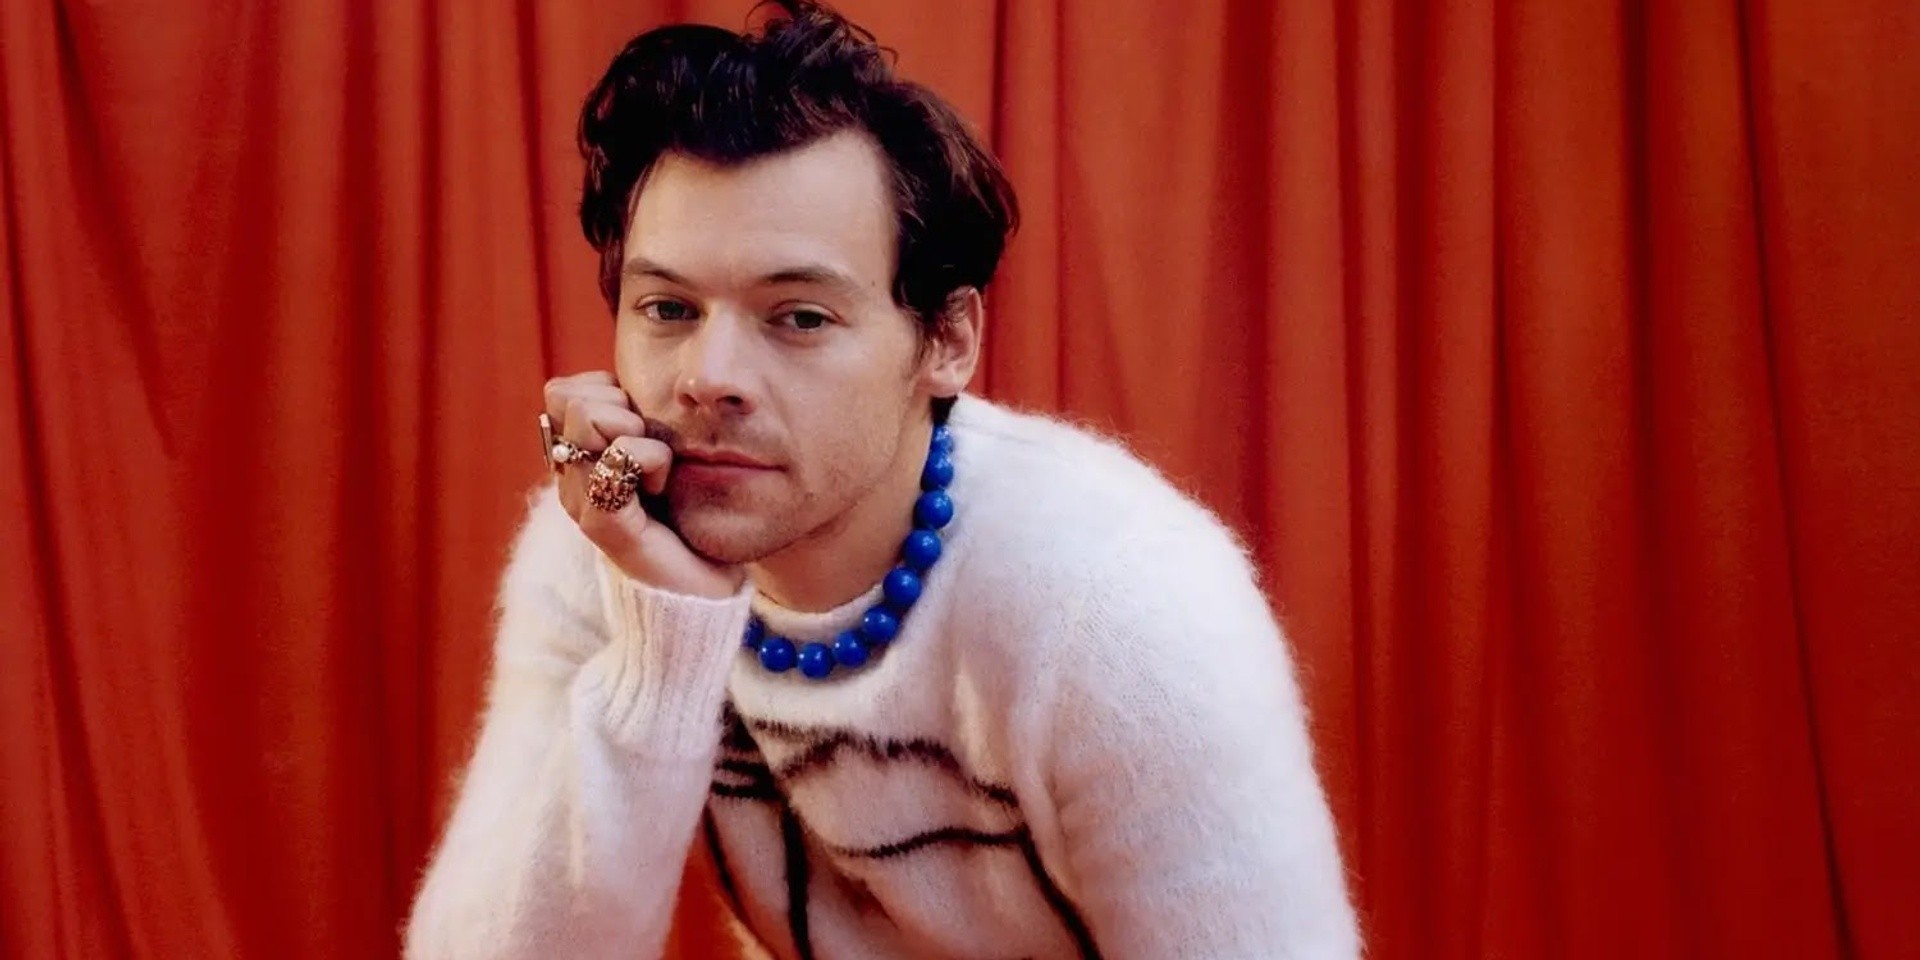 Harry Styles drops tracklist for new album, 'Harry's House'